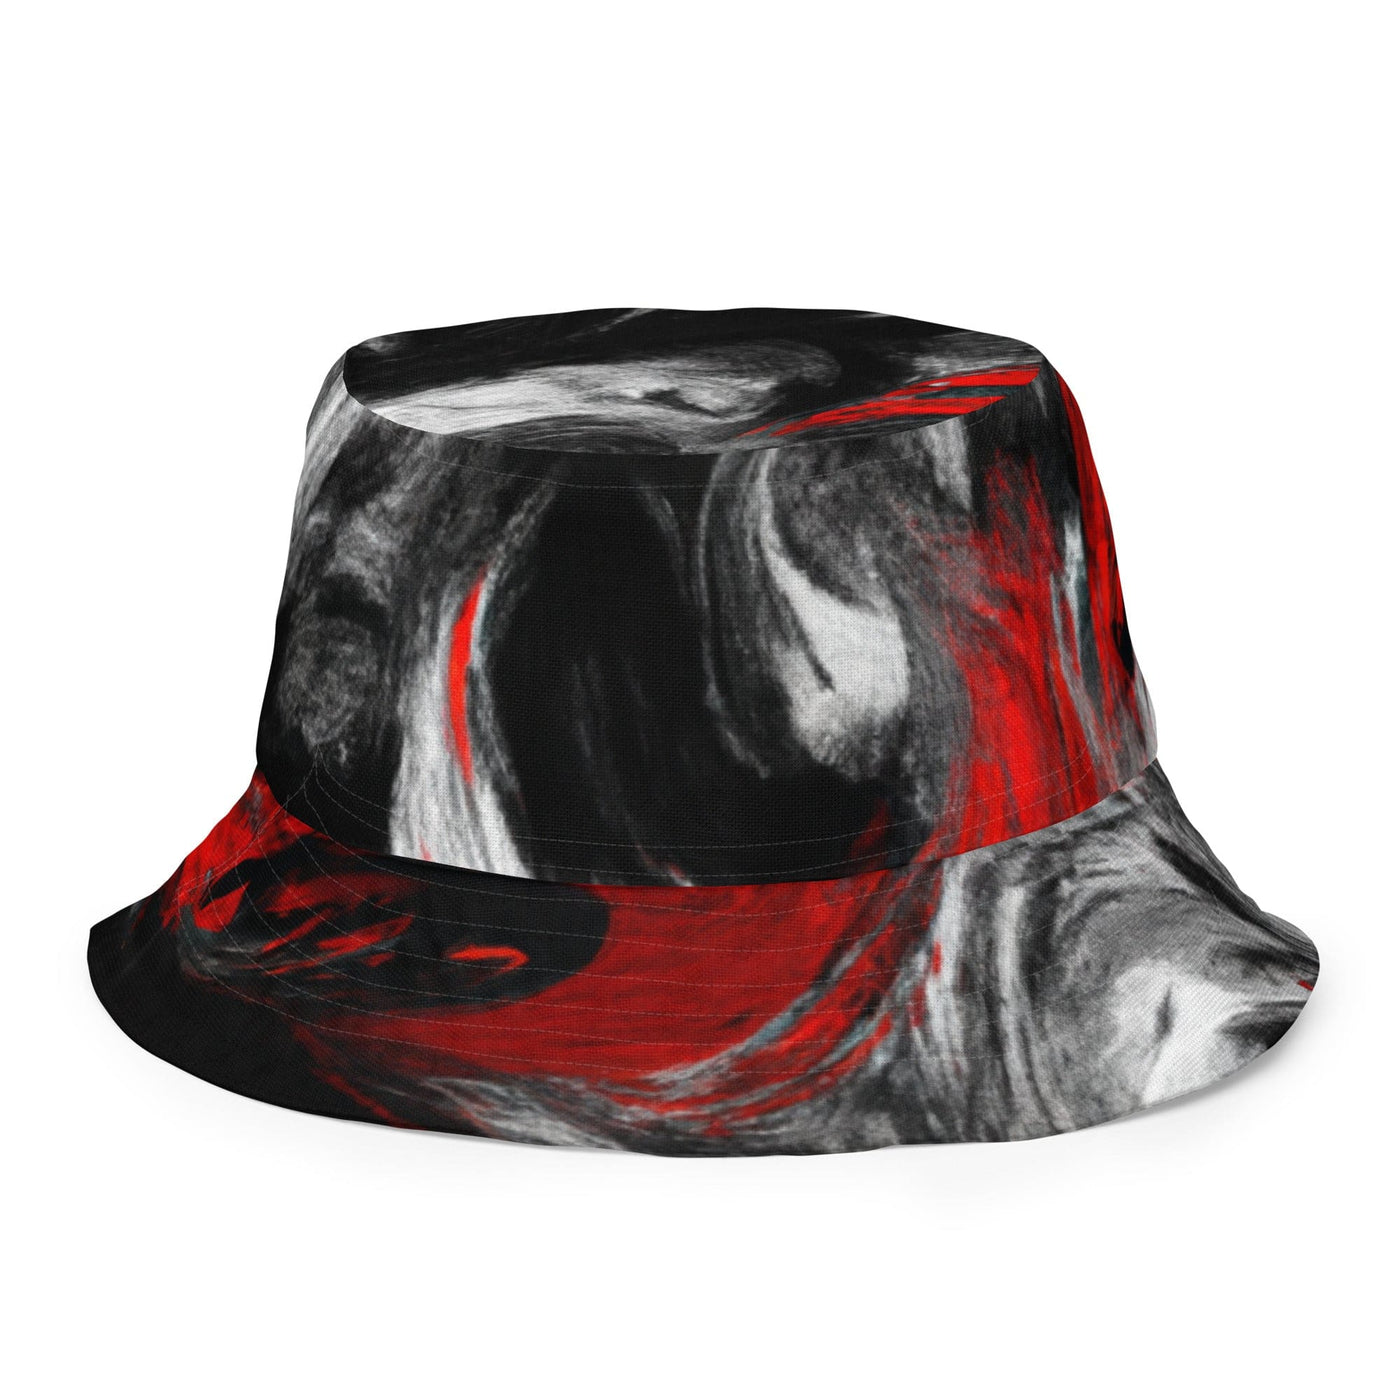 Reversible Bucket Hat Decorative Black Red White Abstract Seamless - Unisex